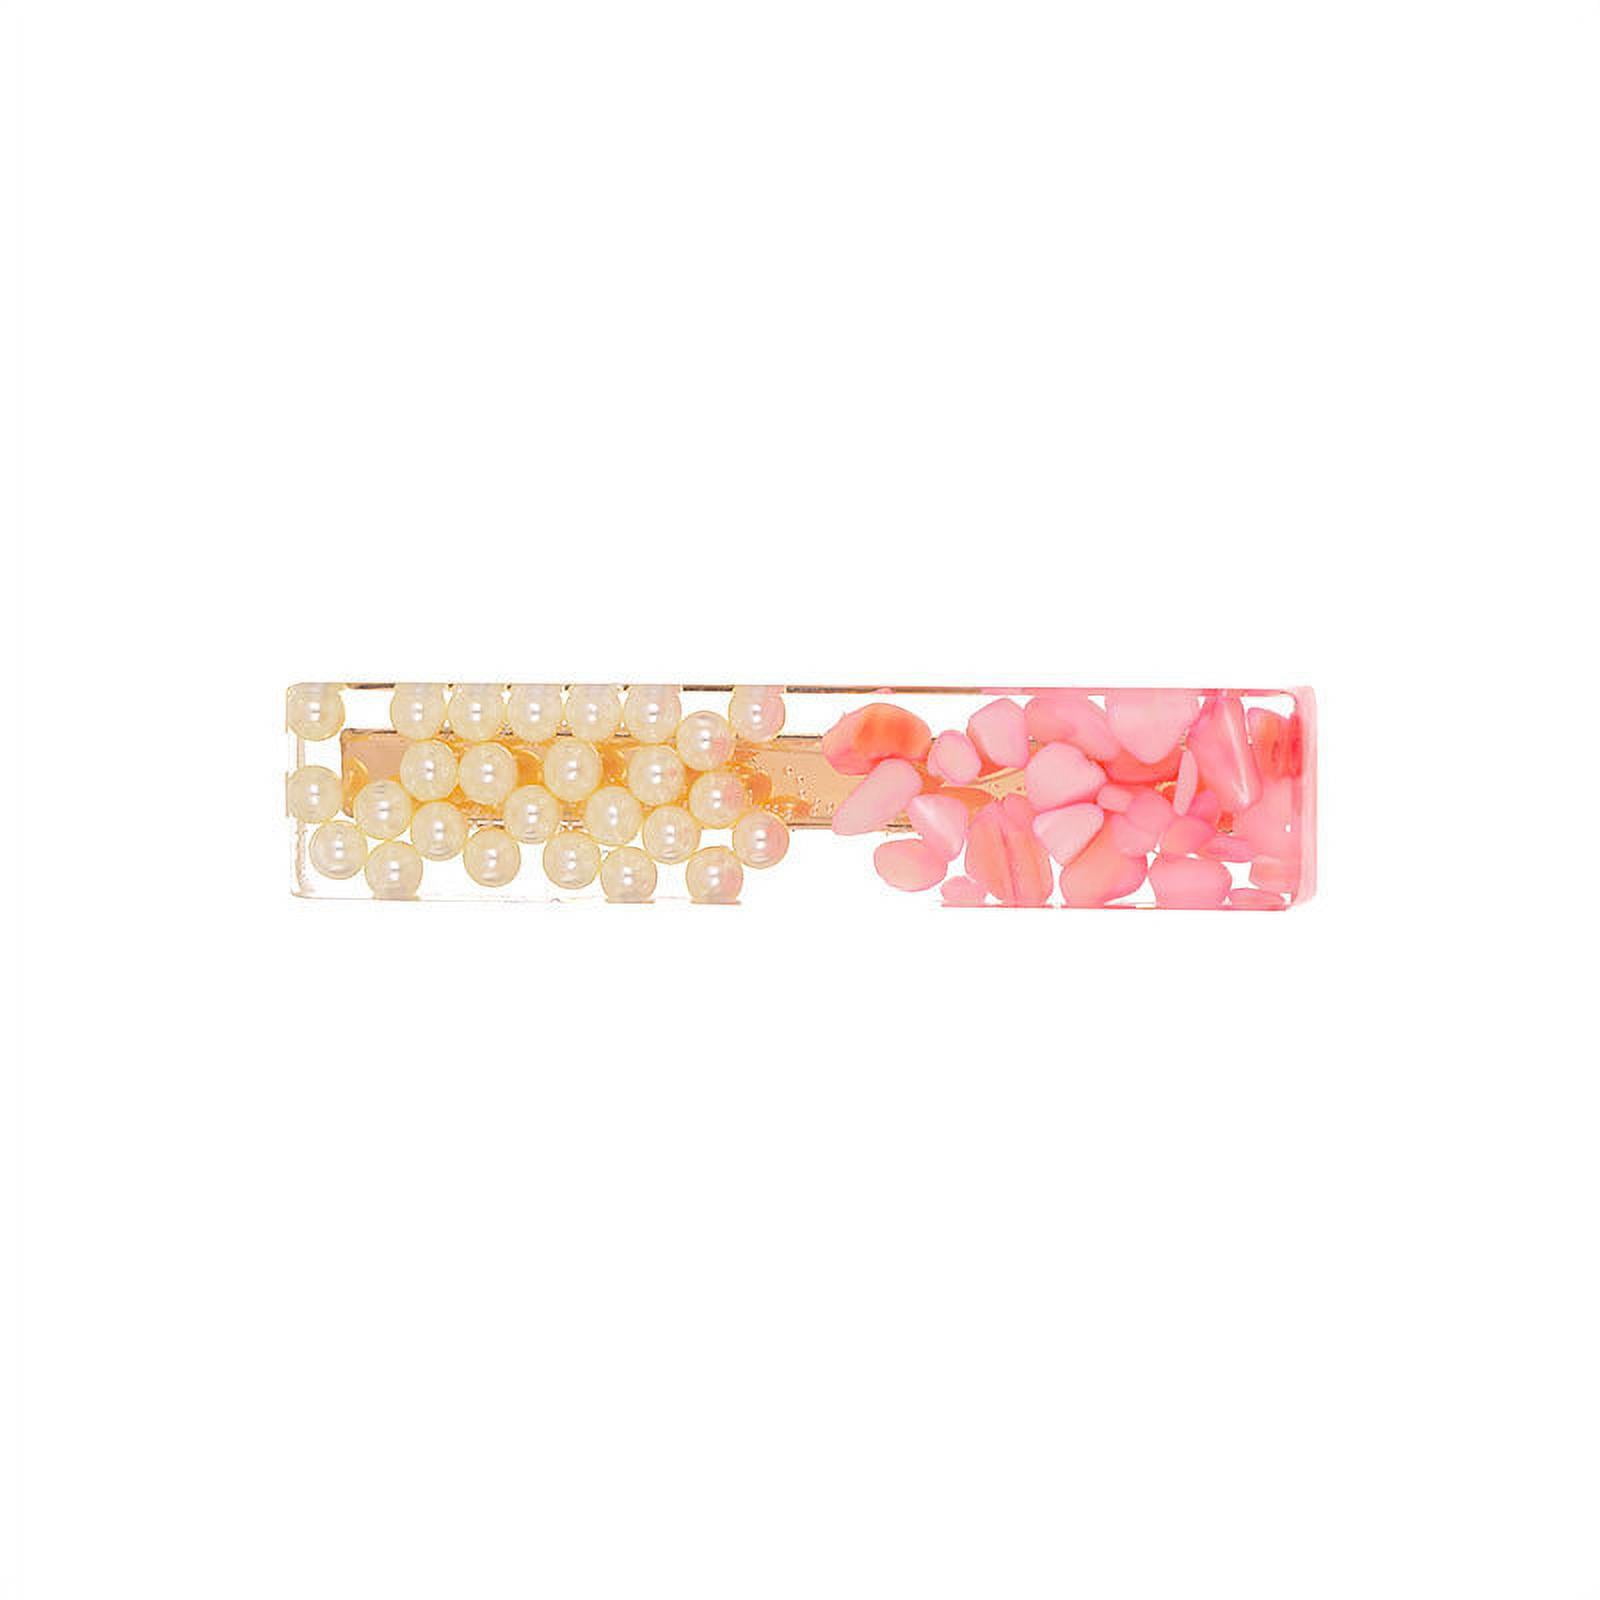 2PCS Girls Pearl Hair Clip Hairband Comb Bobby Pin Barrette Hairpin Accessories 